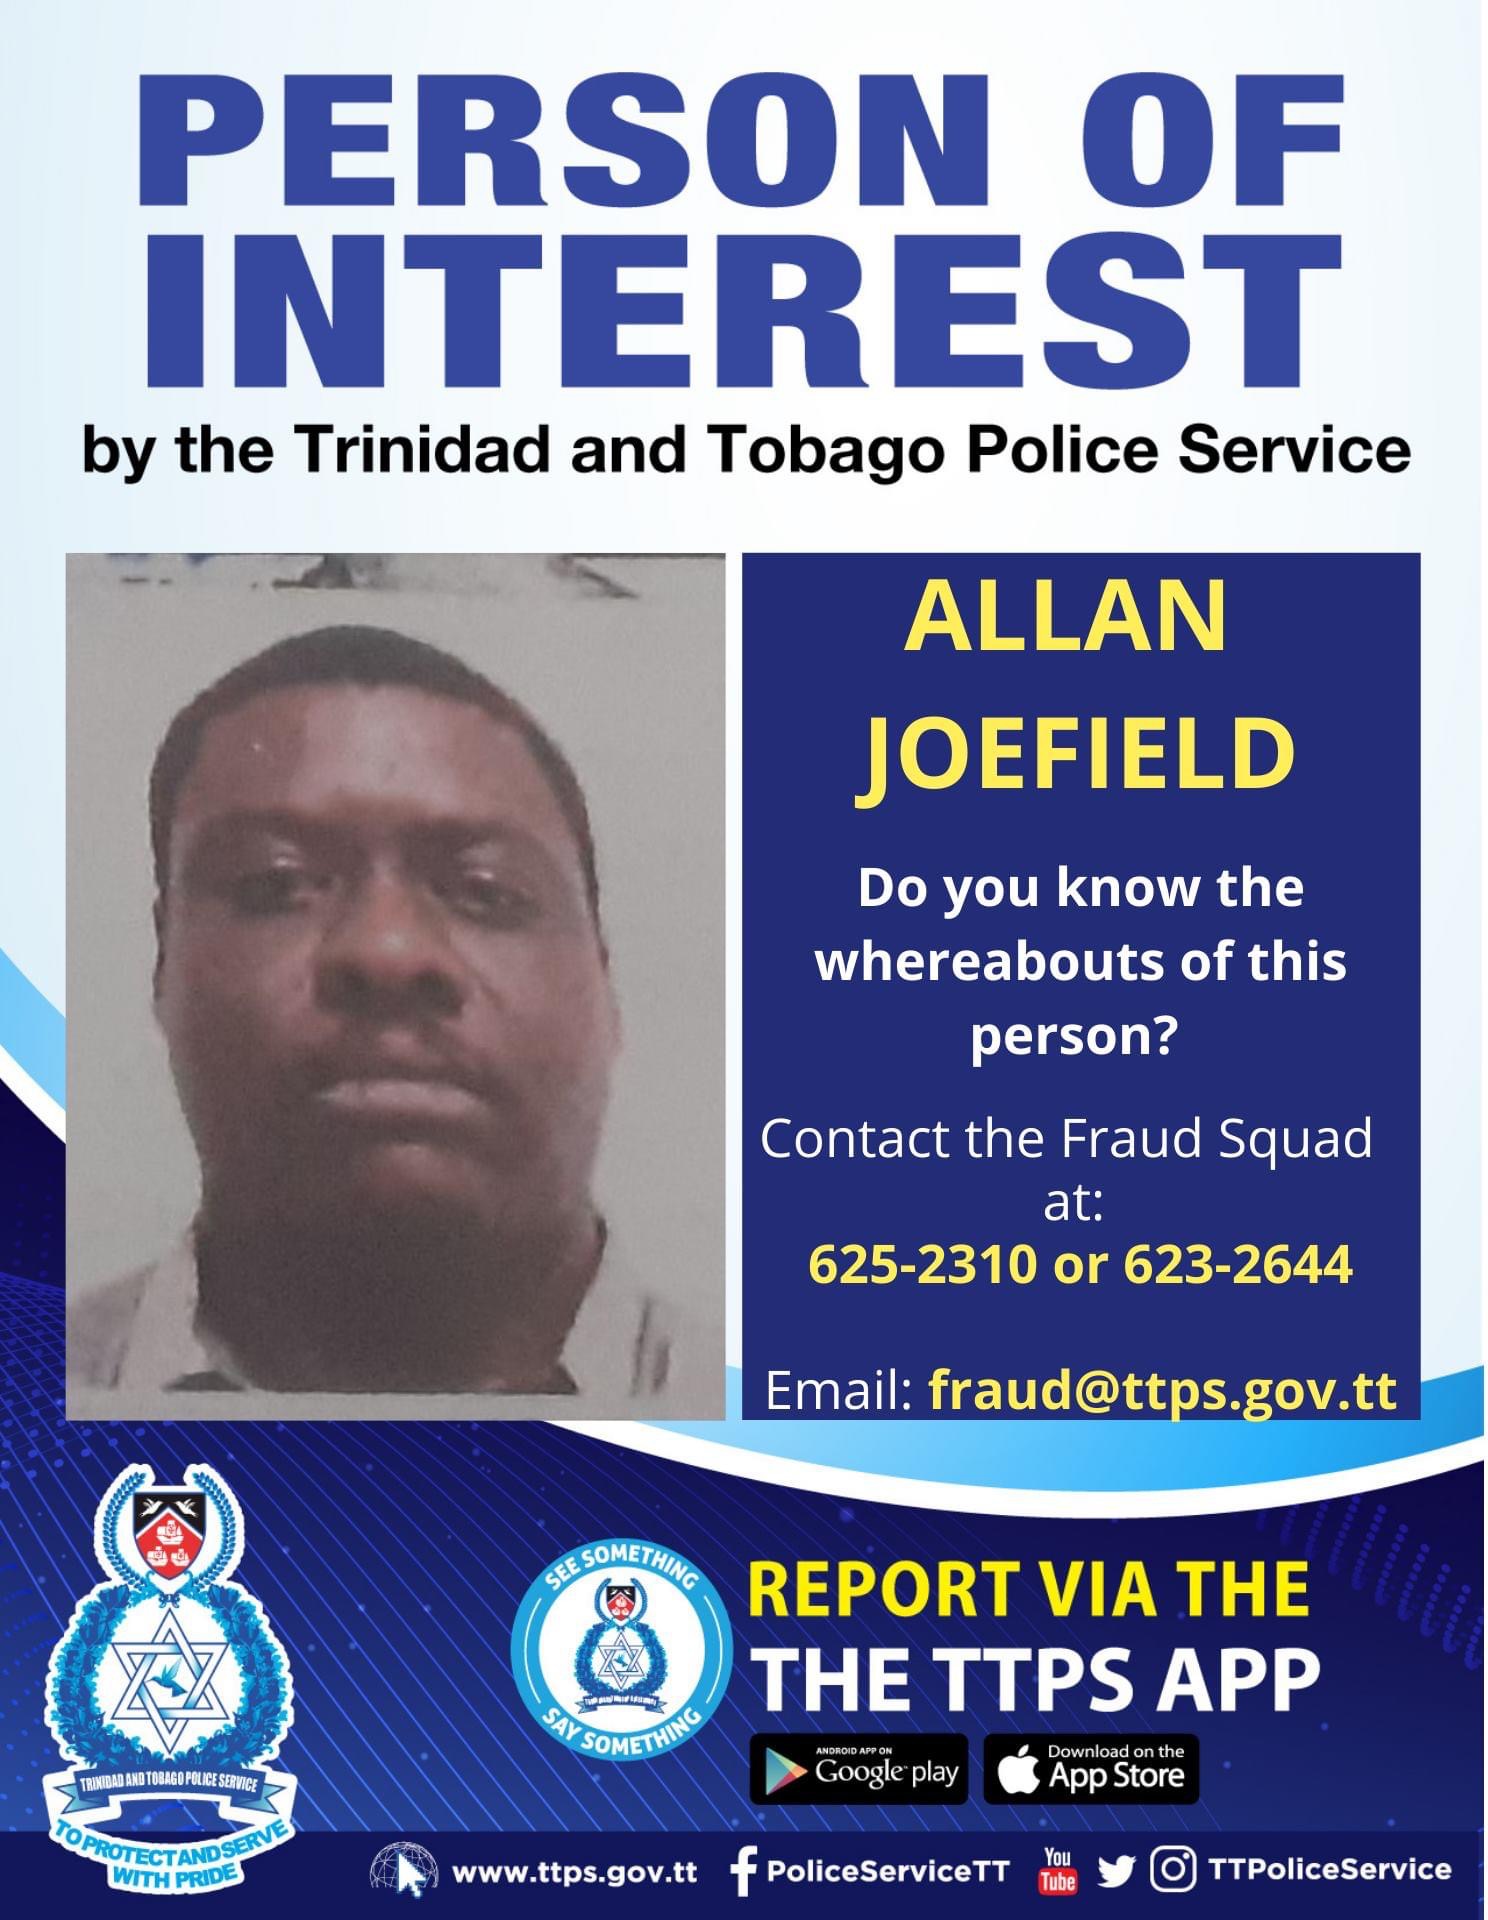 Fraud Squad on the hunt to find Allan Joefield